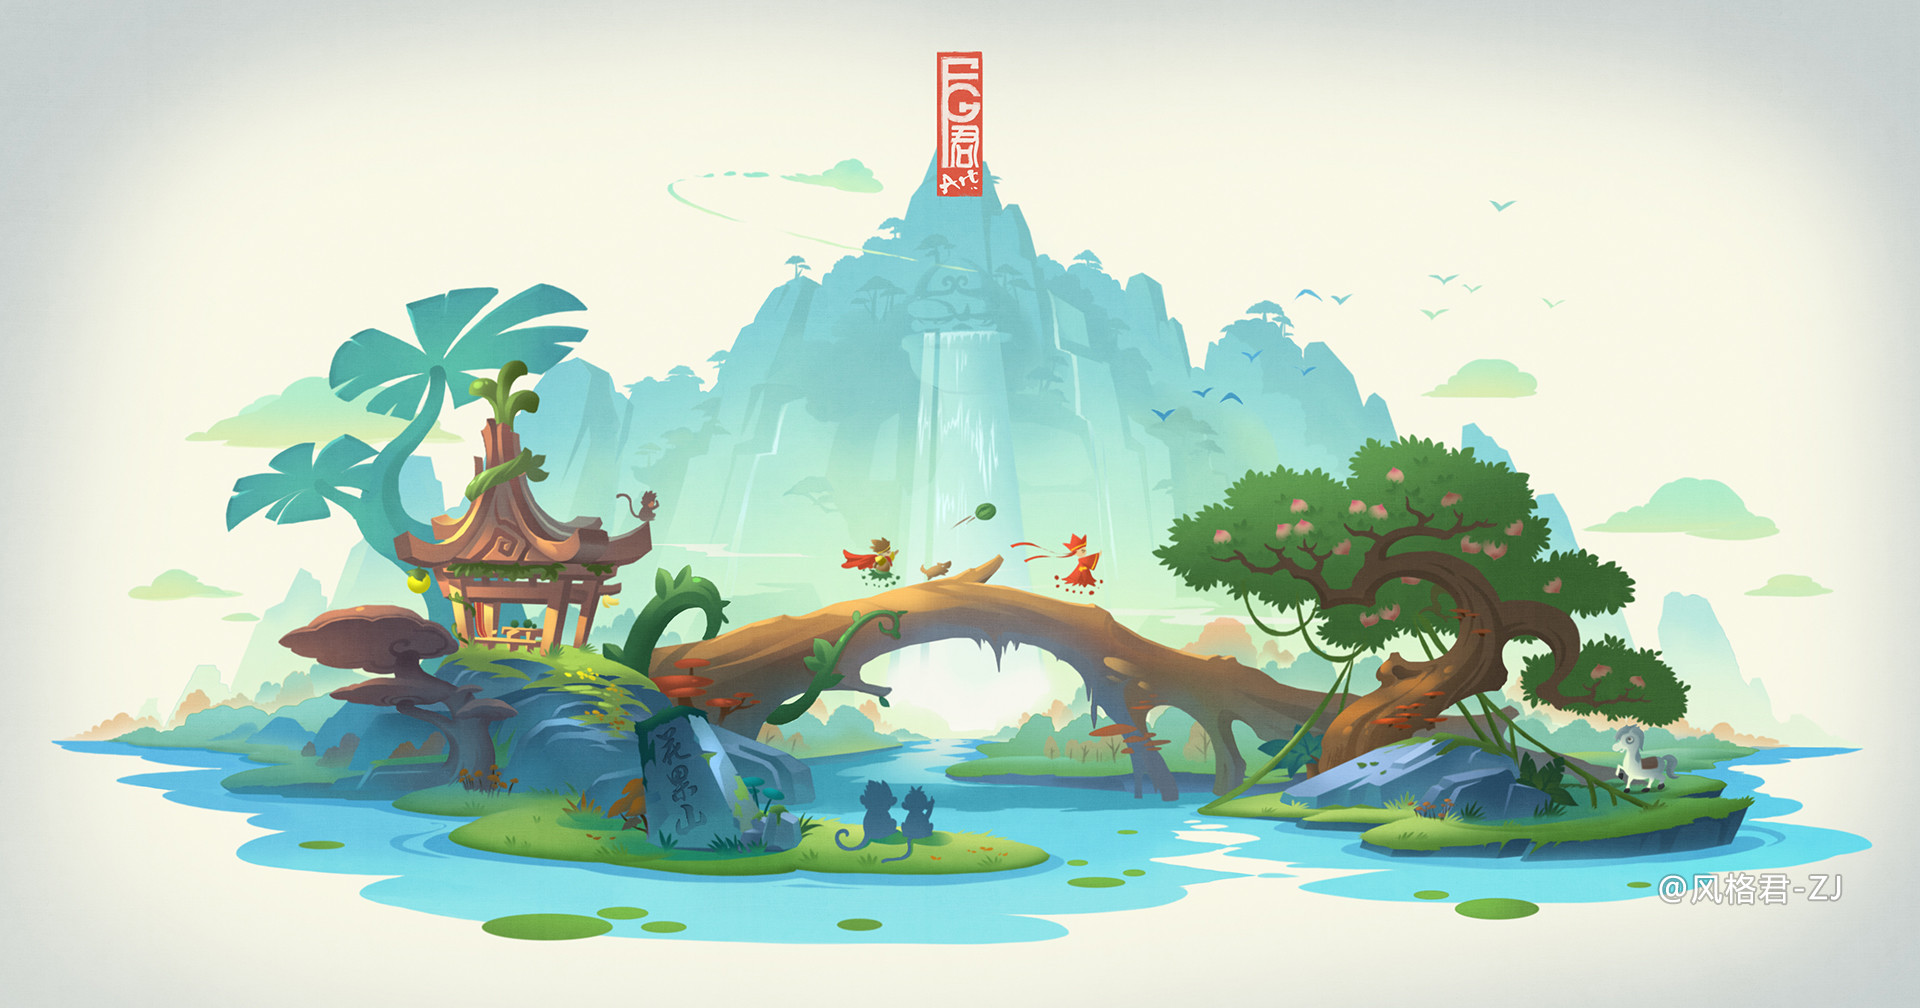 General 1920x1008 Jun Zhang Asian architecture white background waterfall river monkey horse mountains mushroom vines